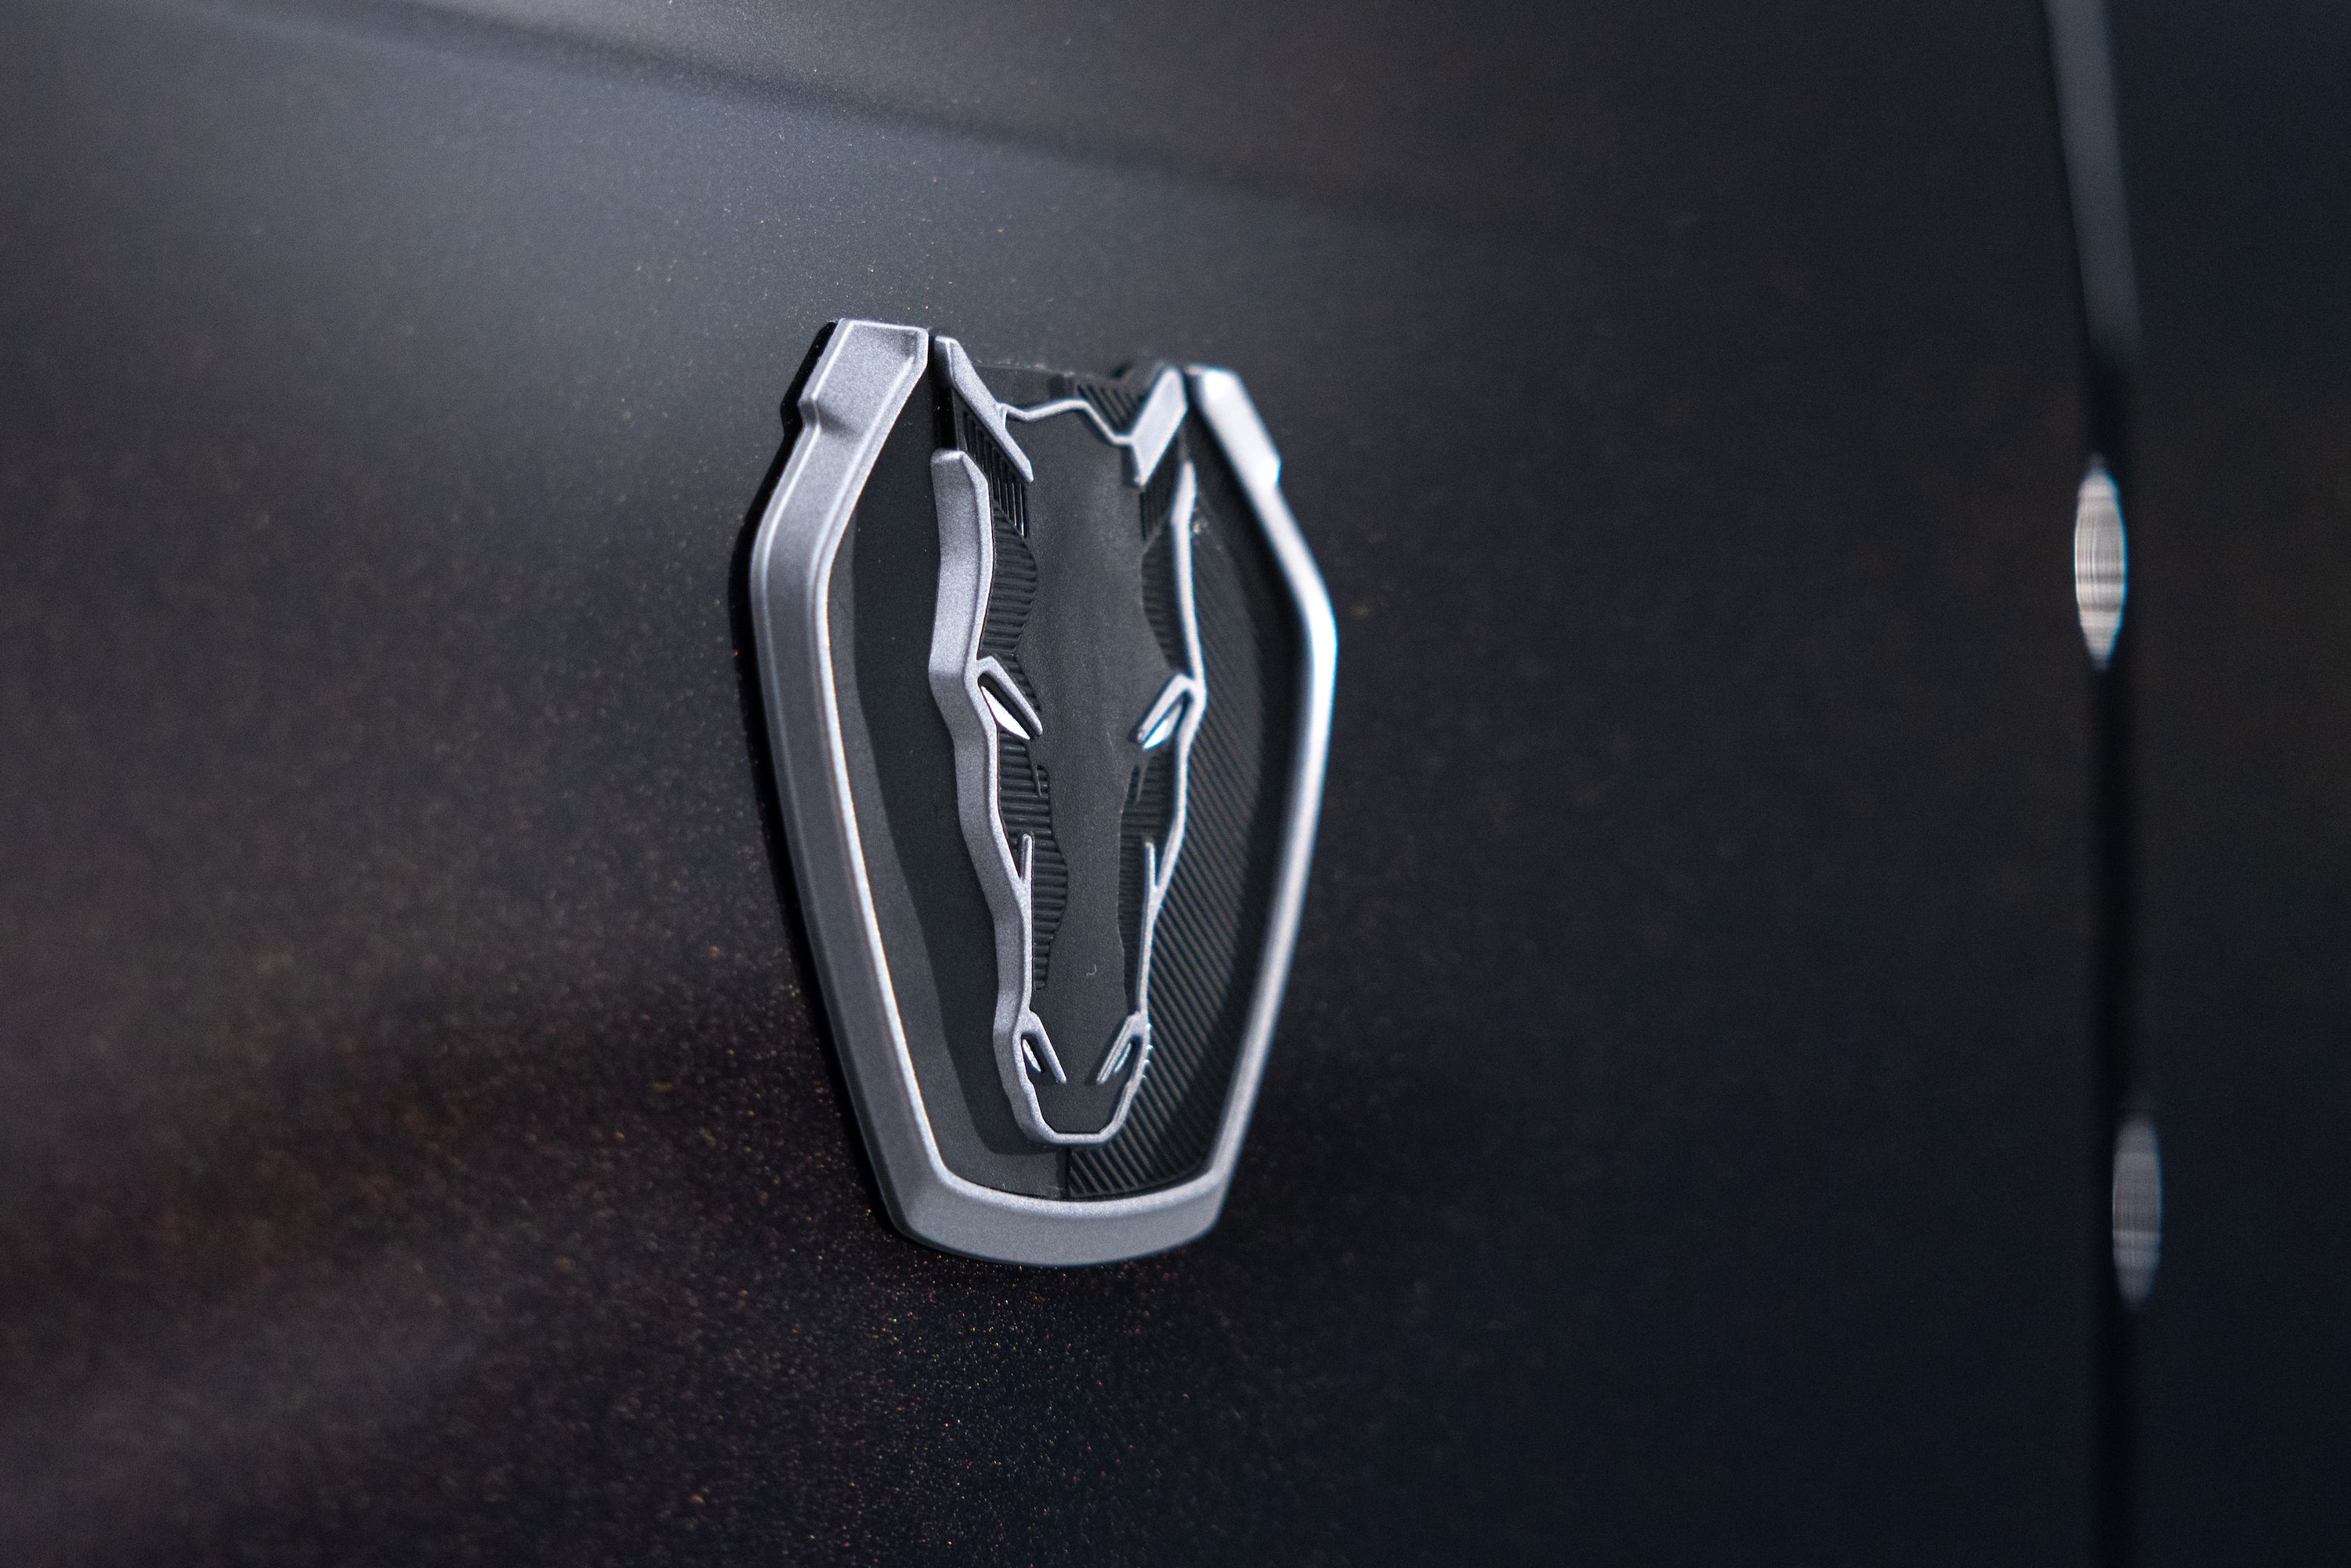 Mustang Dark Horse Spawns Two Track Only Variants